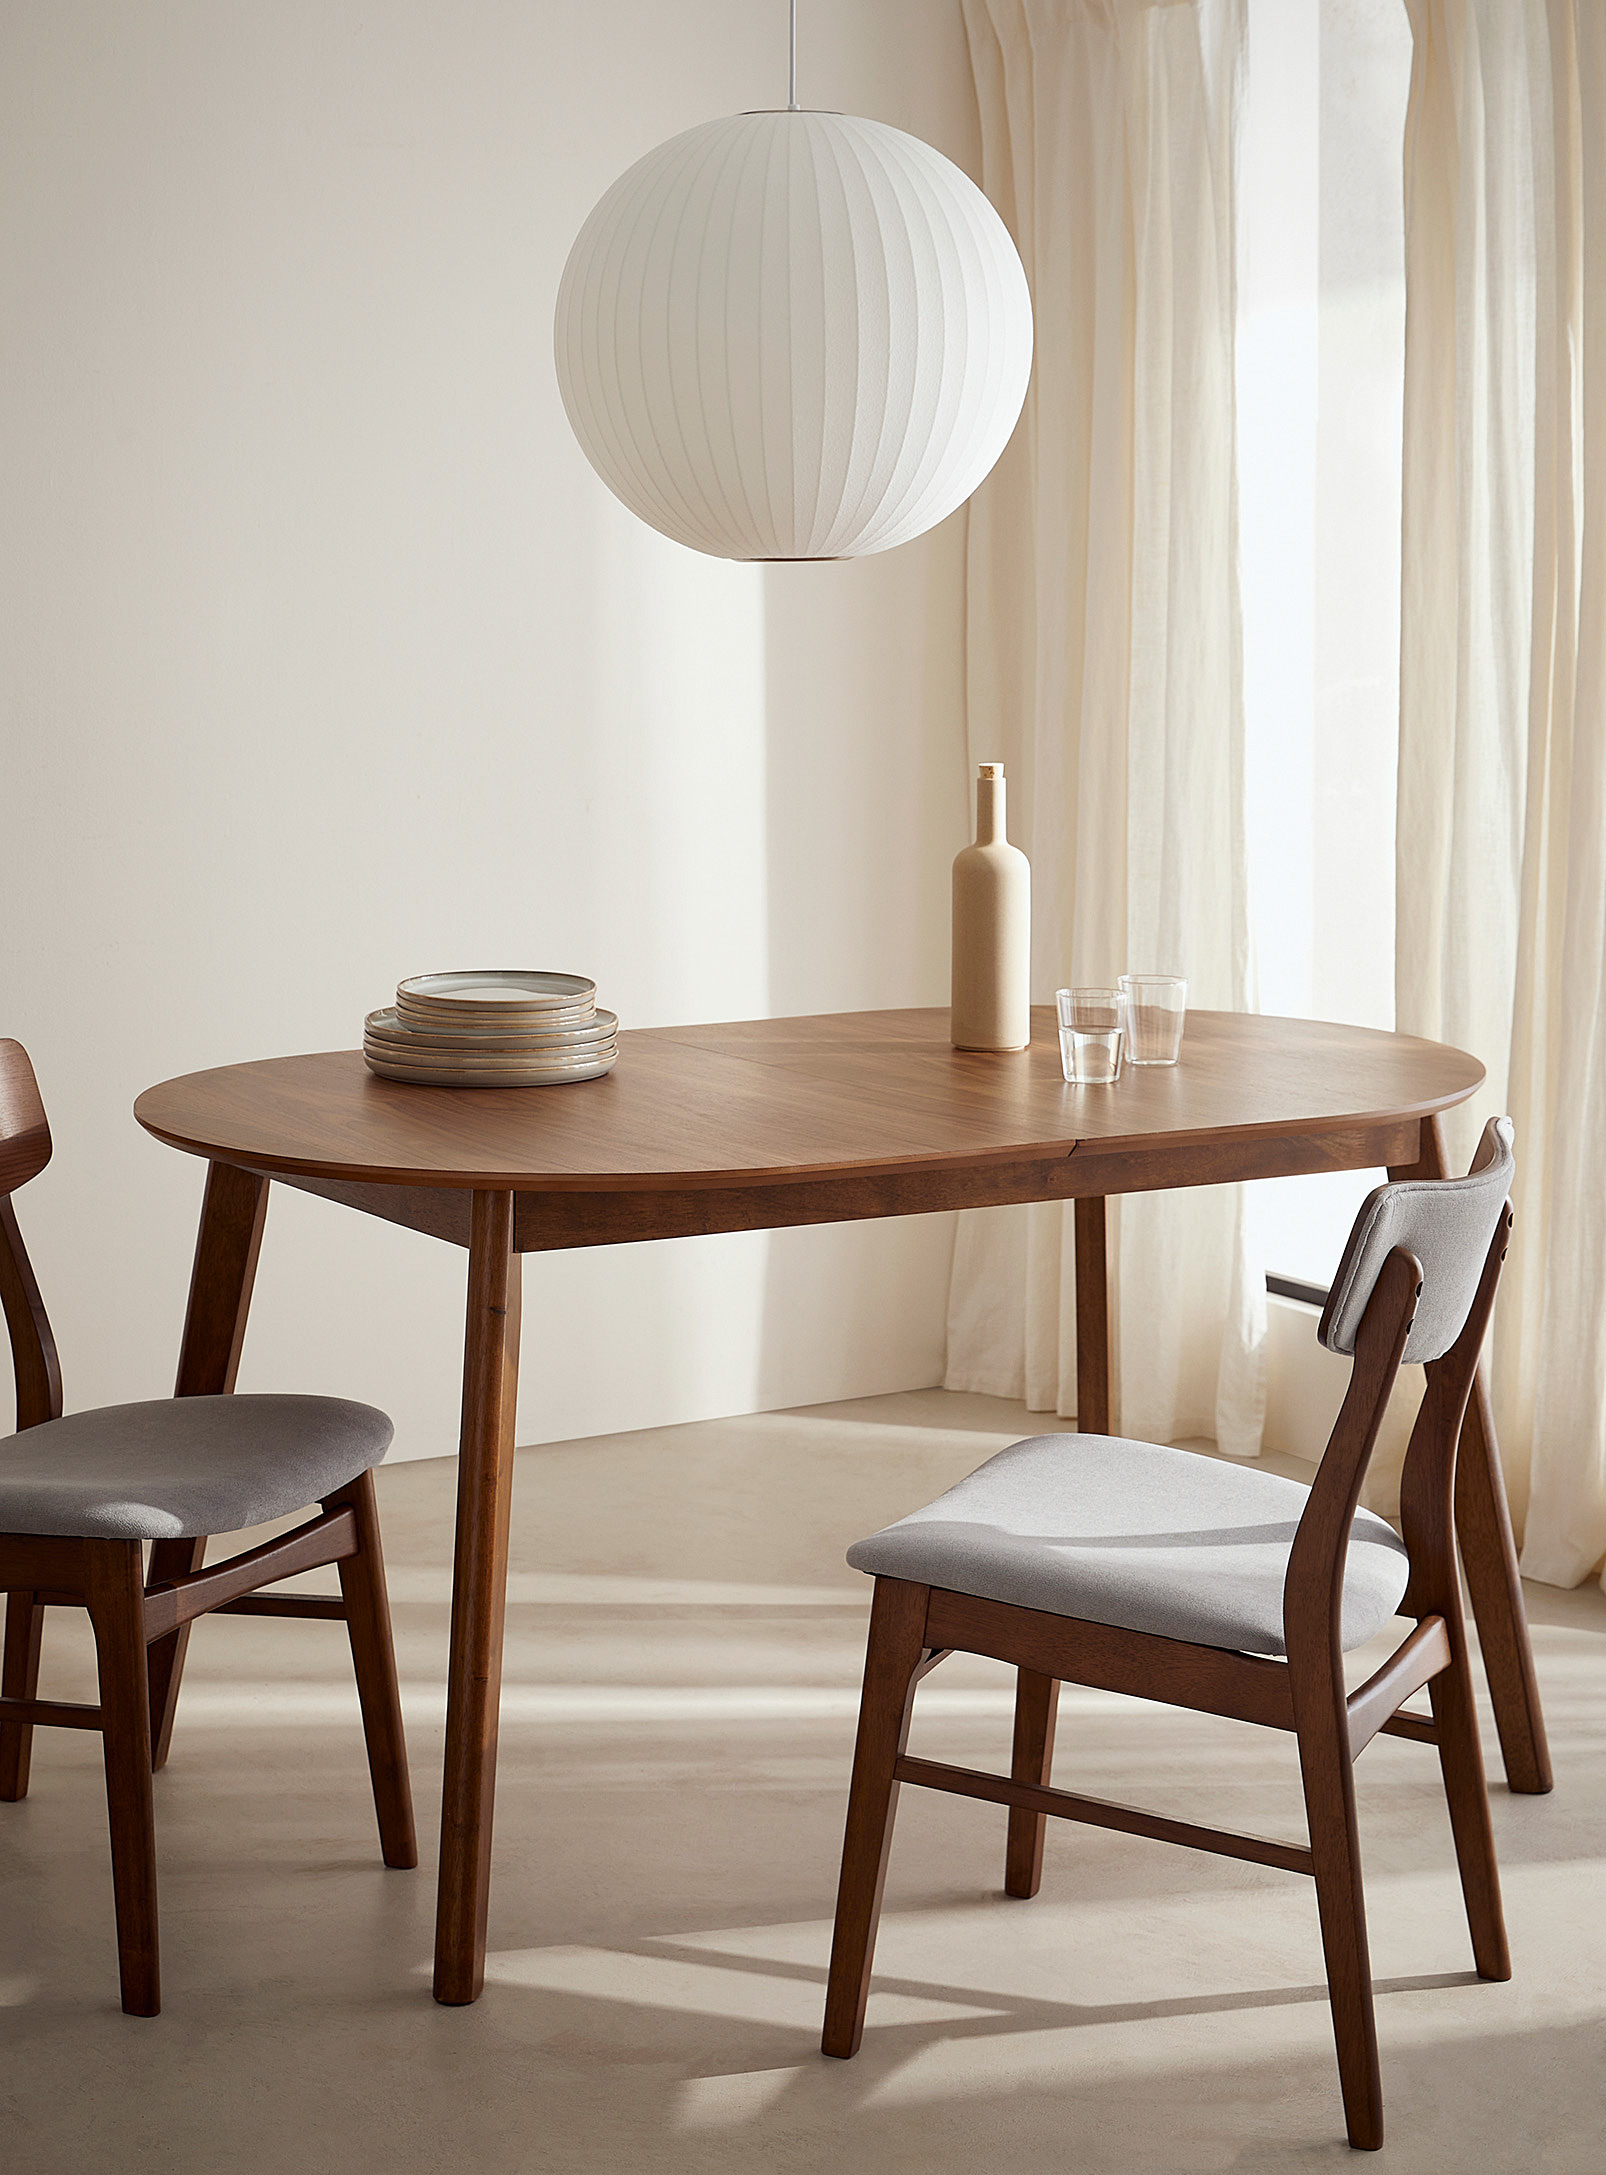 Simons Maison Rounded Wood Table With Extension In Dark Brown